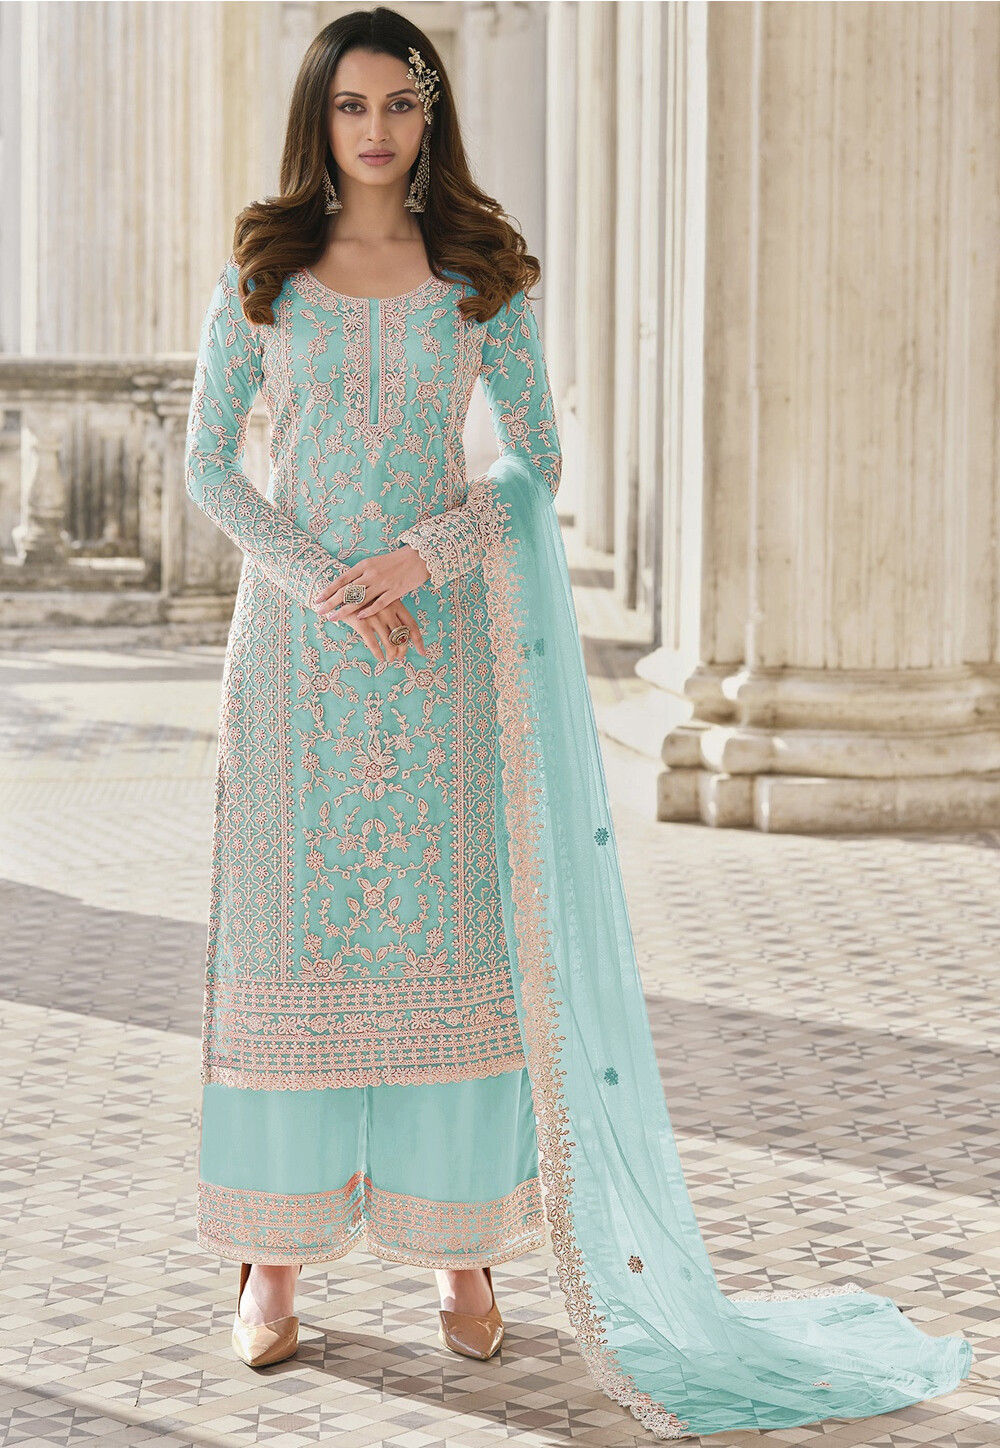 Sea Green Pakistani Suit in Viscose with Jacquard Work